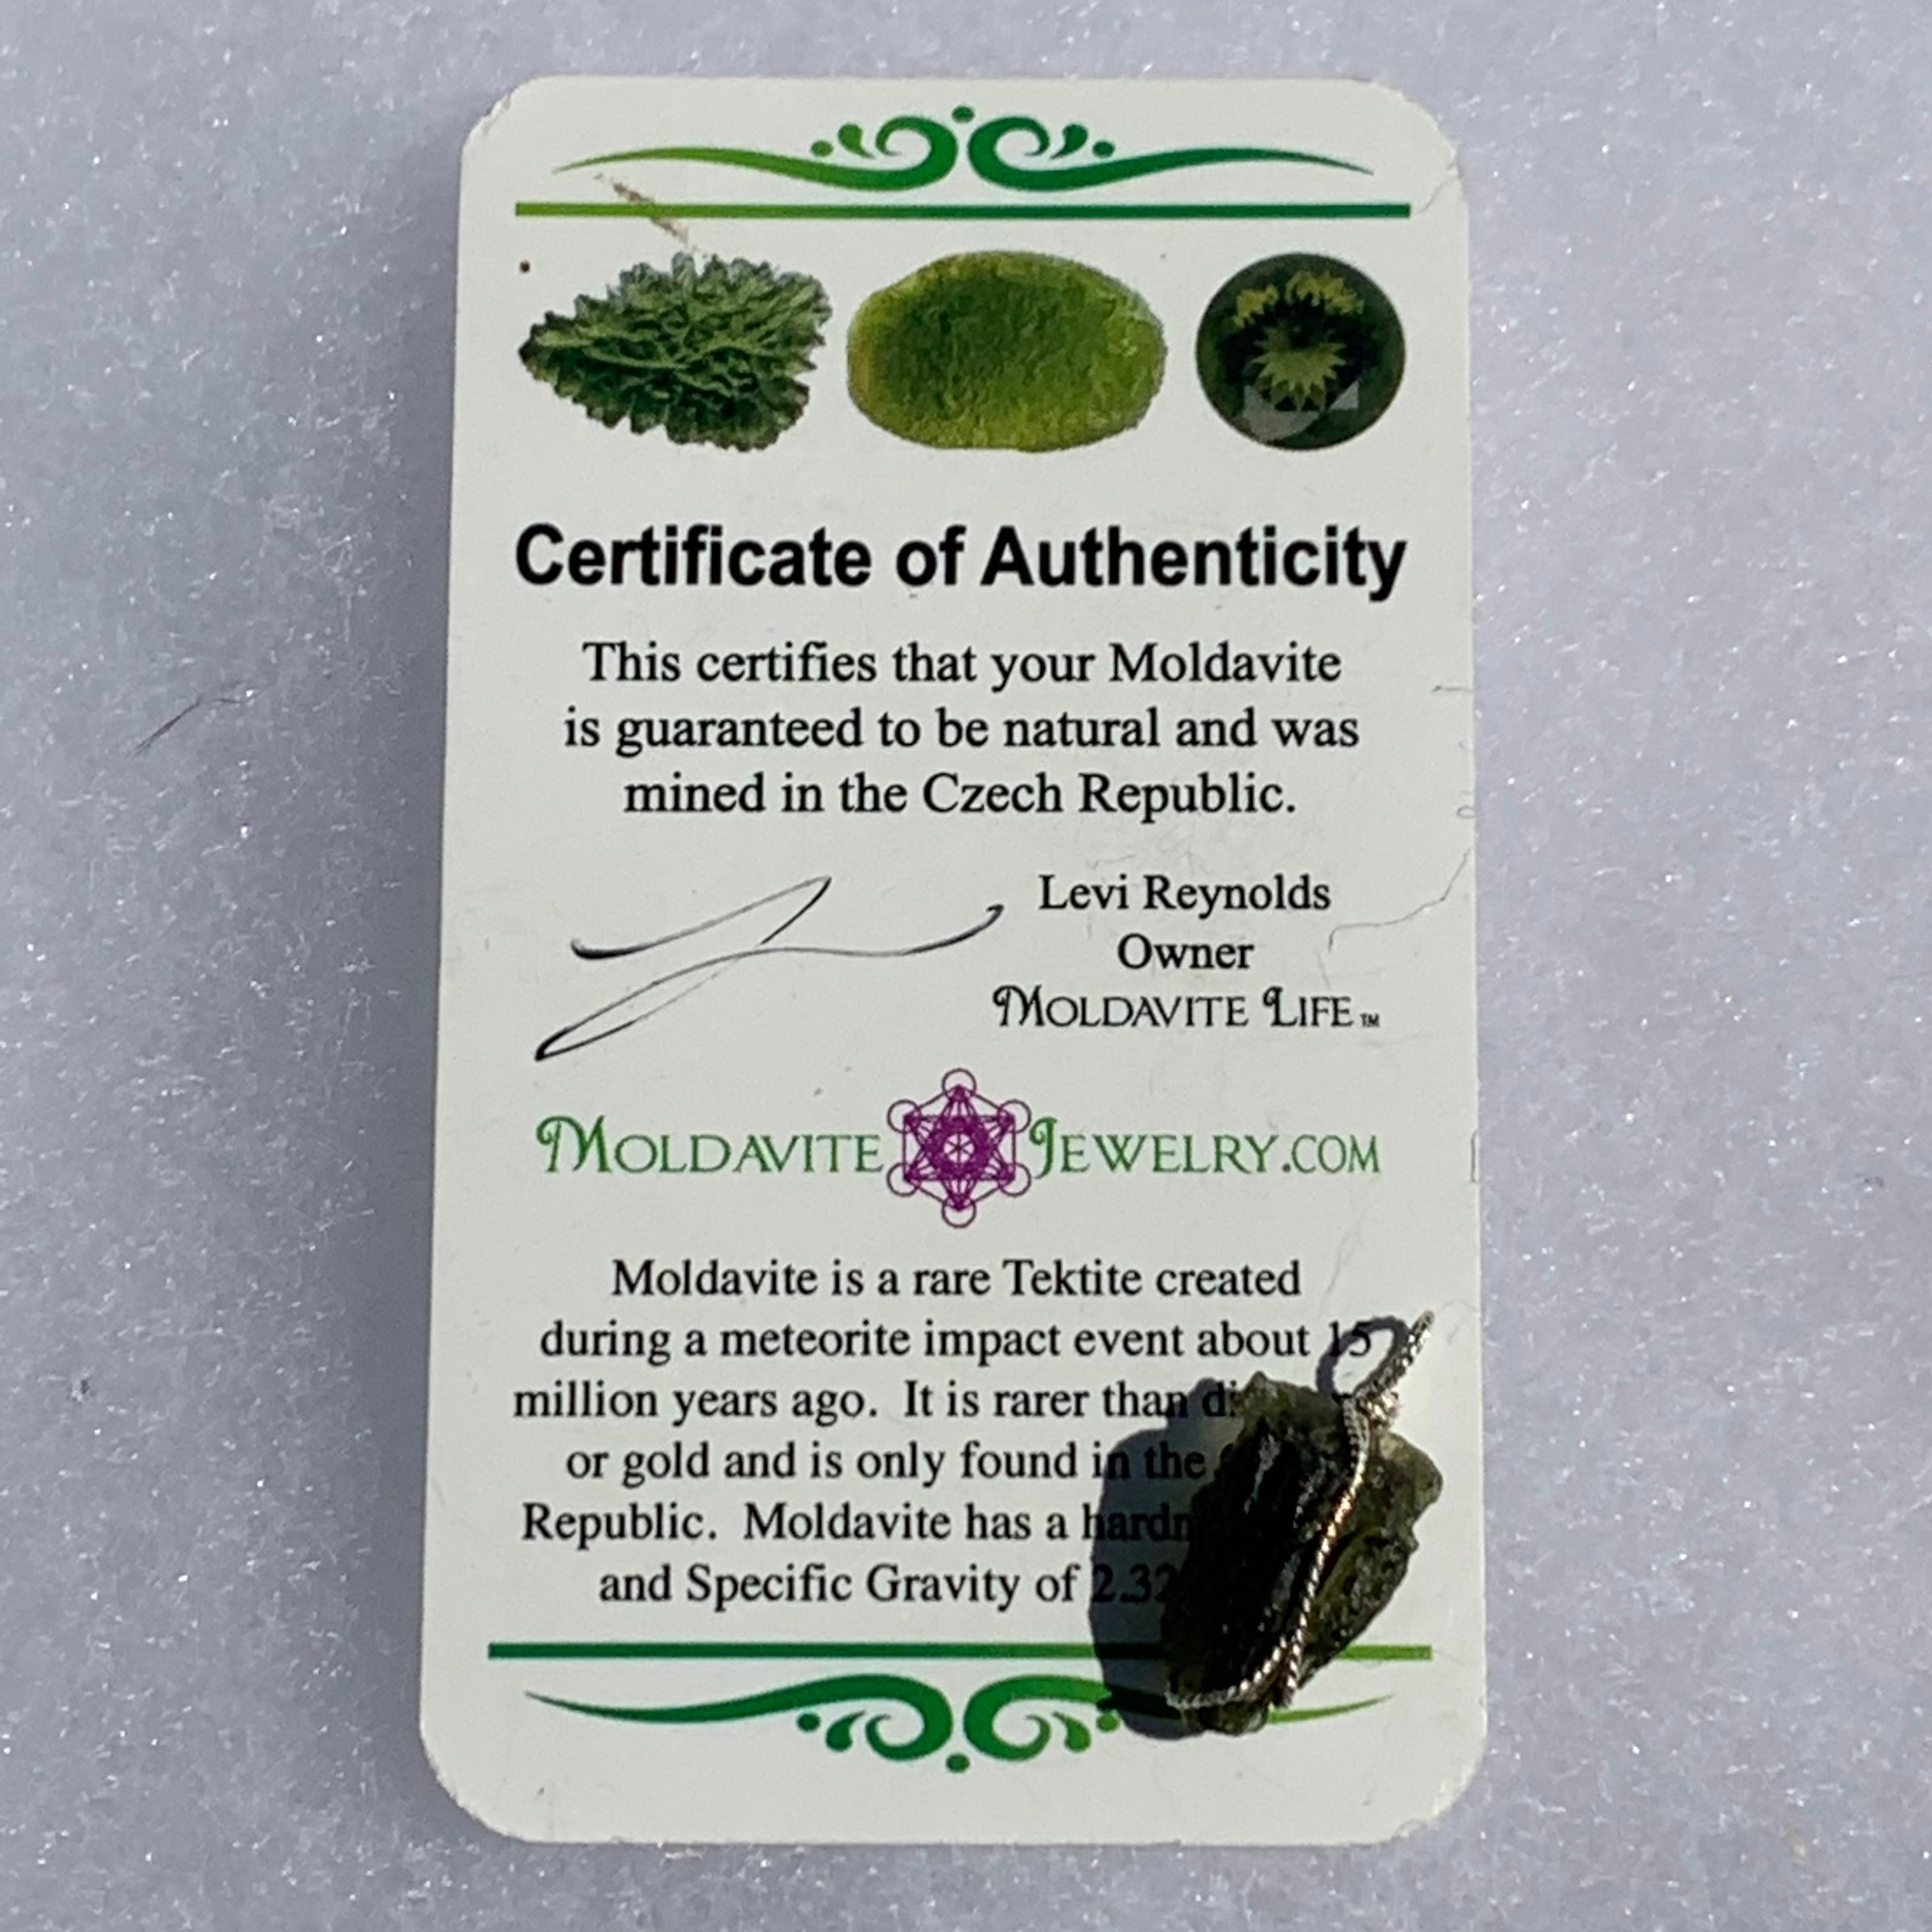 Moldavite sterling silver pendant displayed with the certificate of authenticity